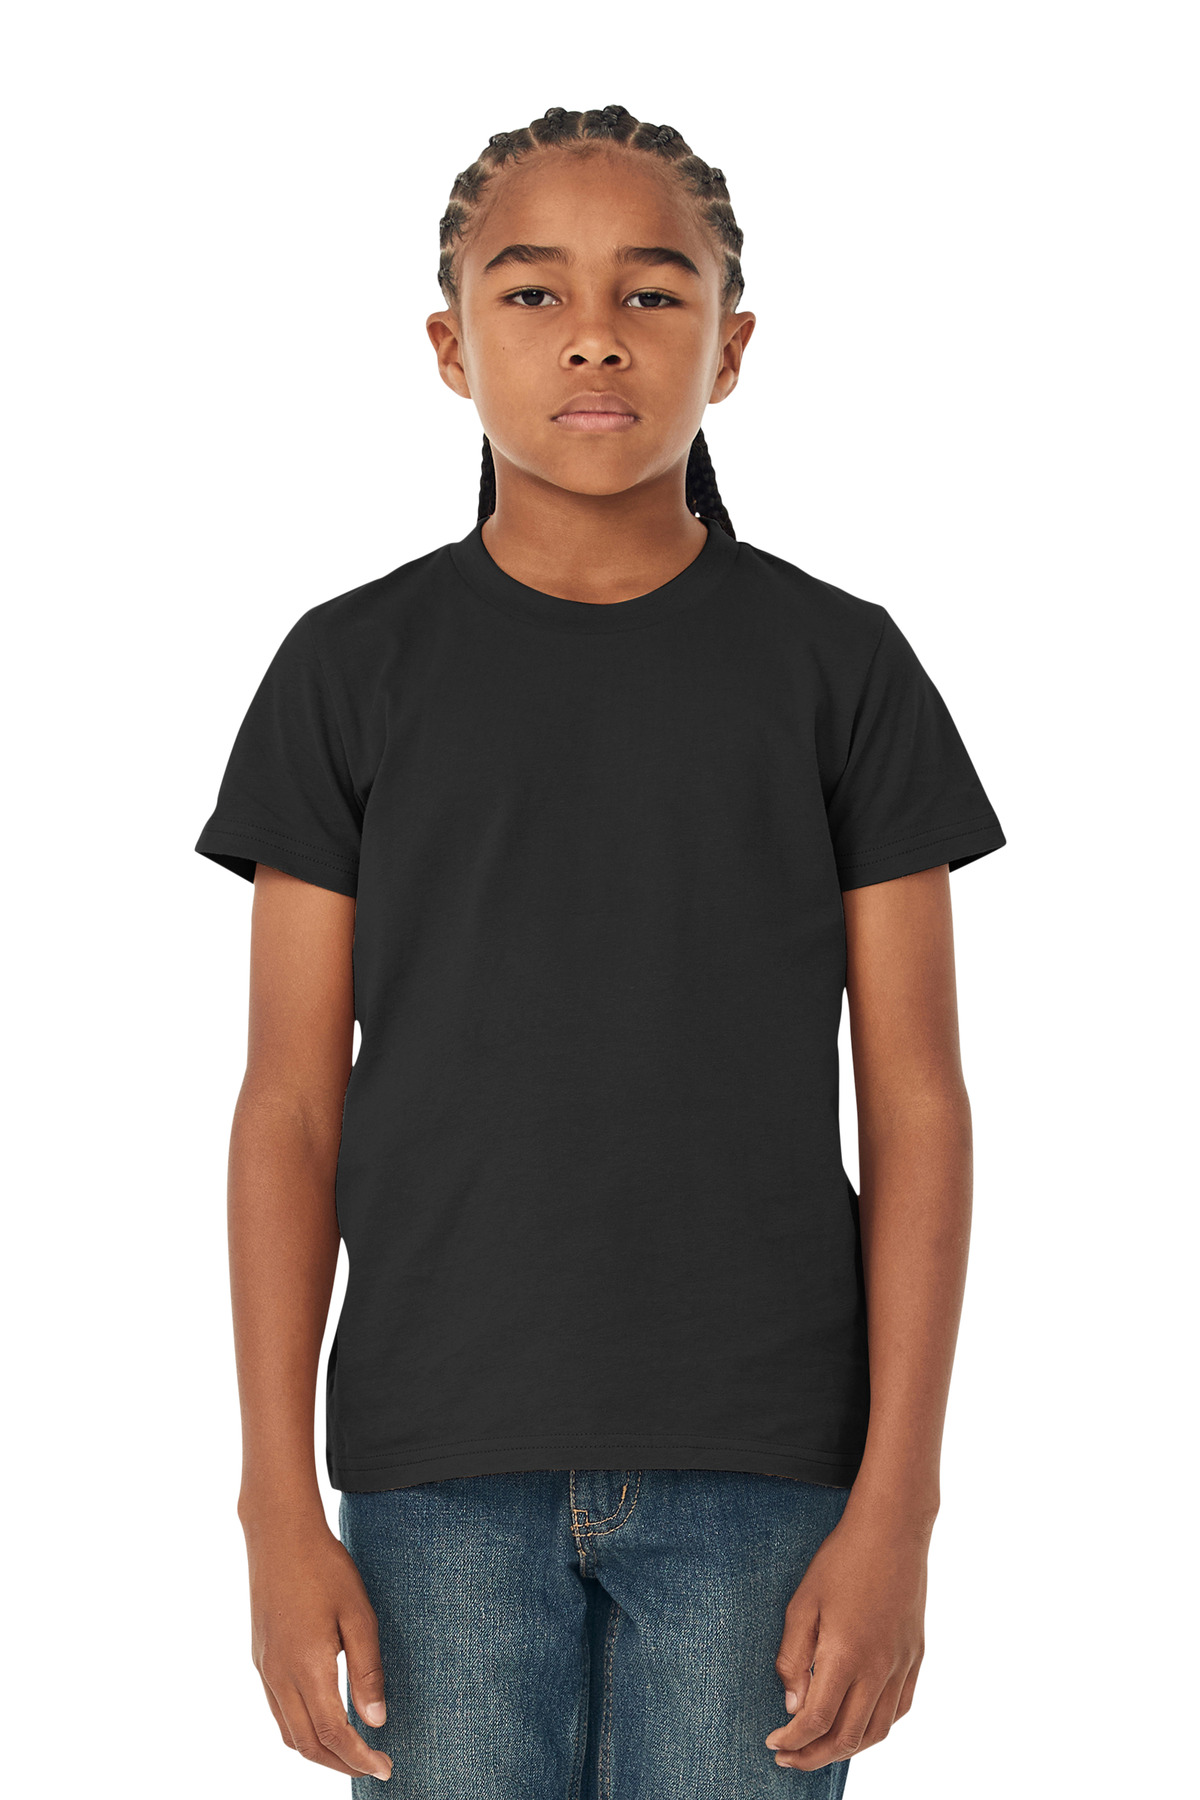 BELLA+CANVAS  Youth Jersey Short Sleeve Tee. BC3001Y